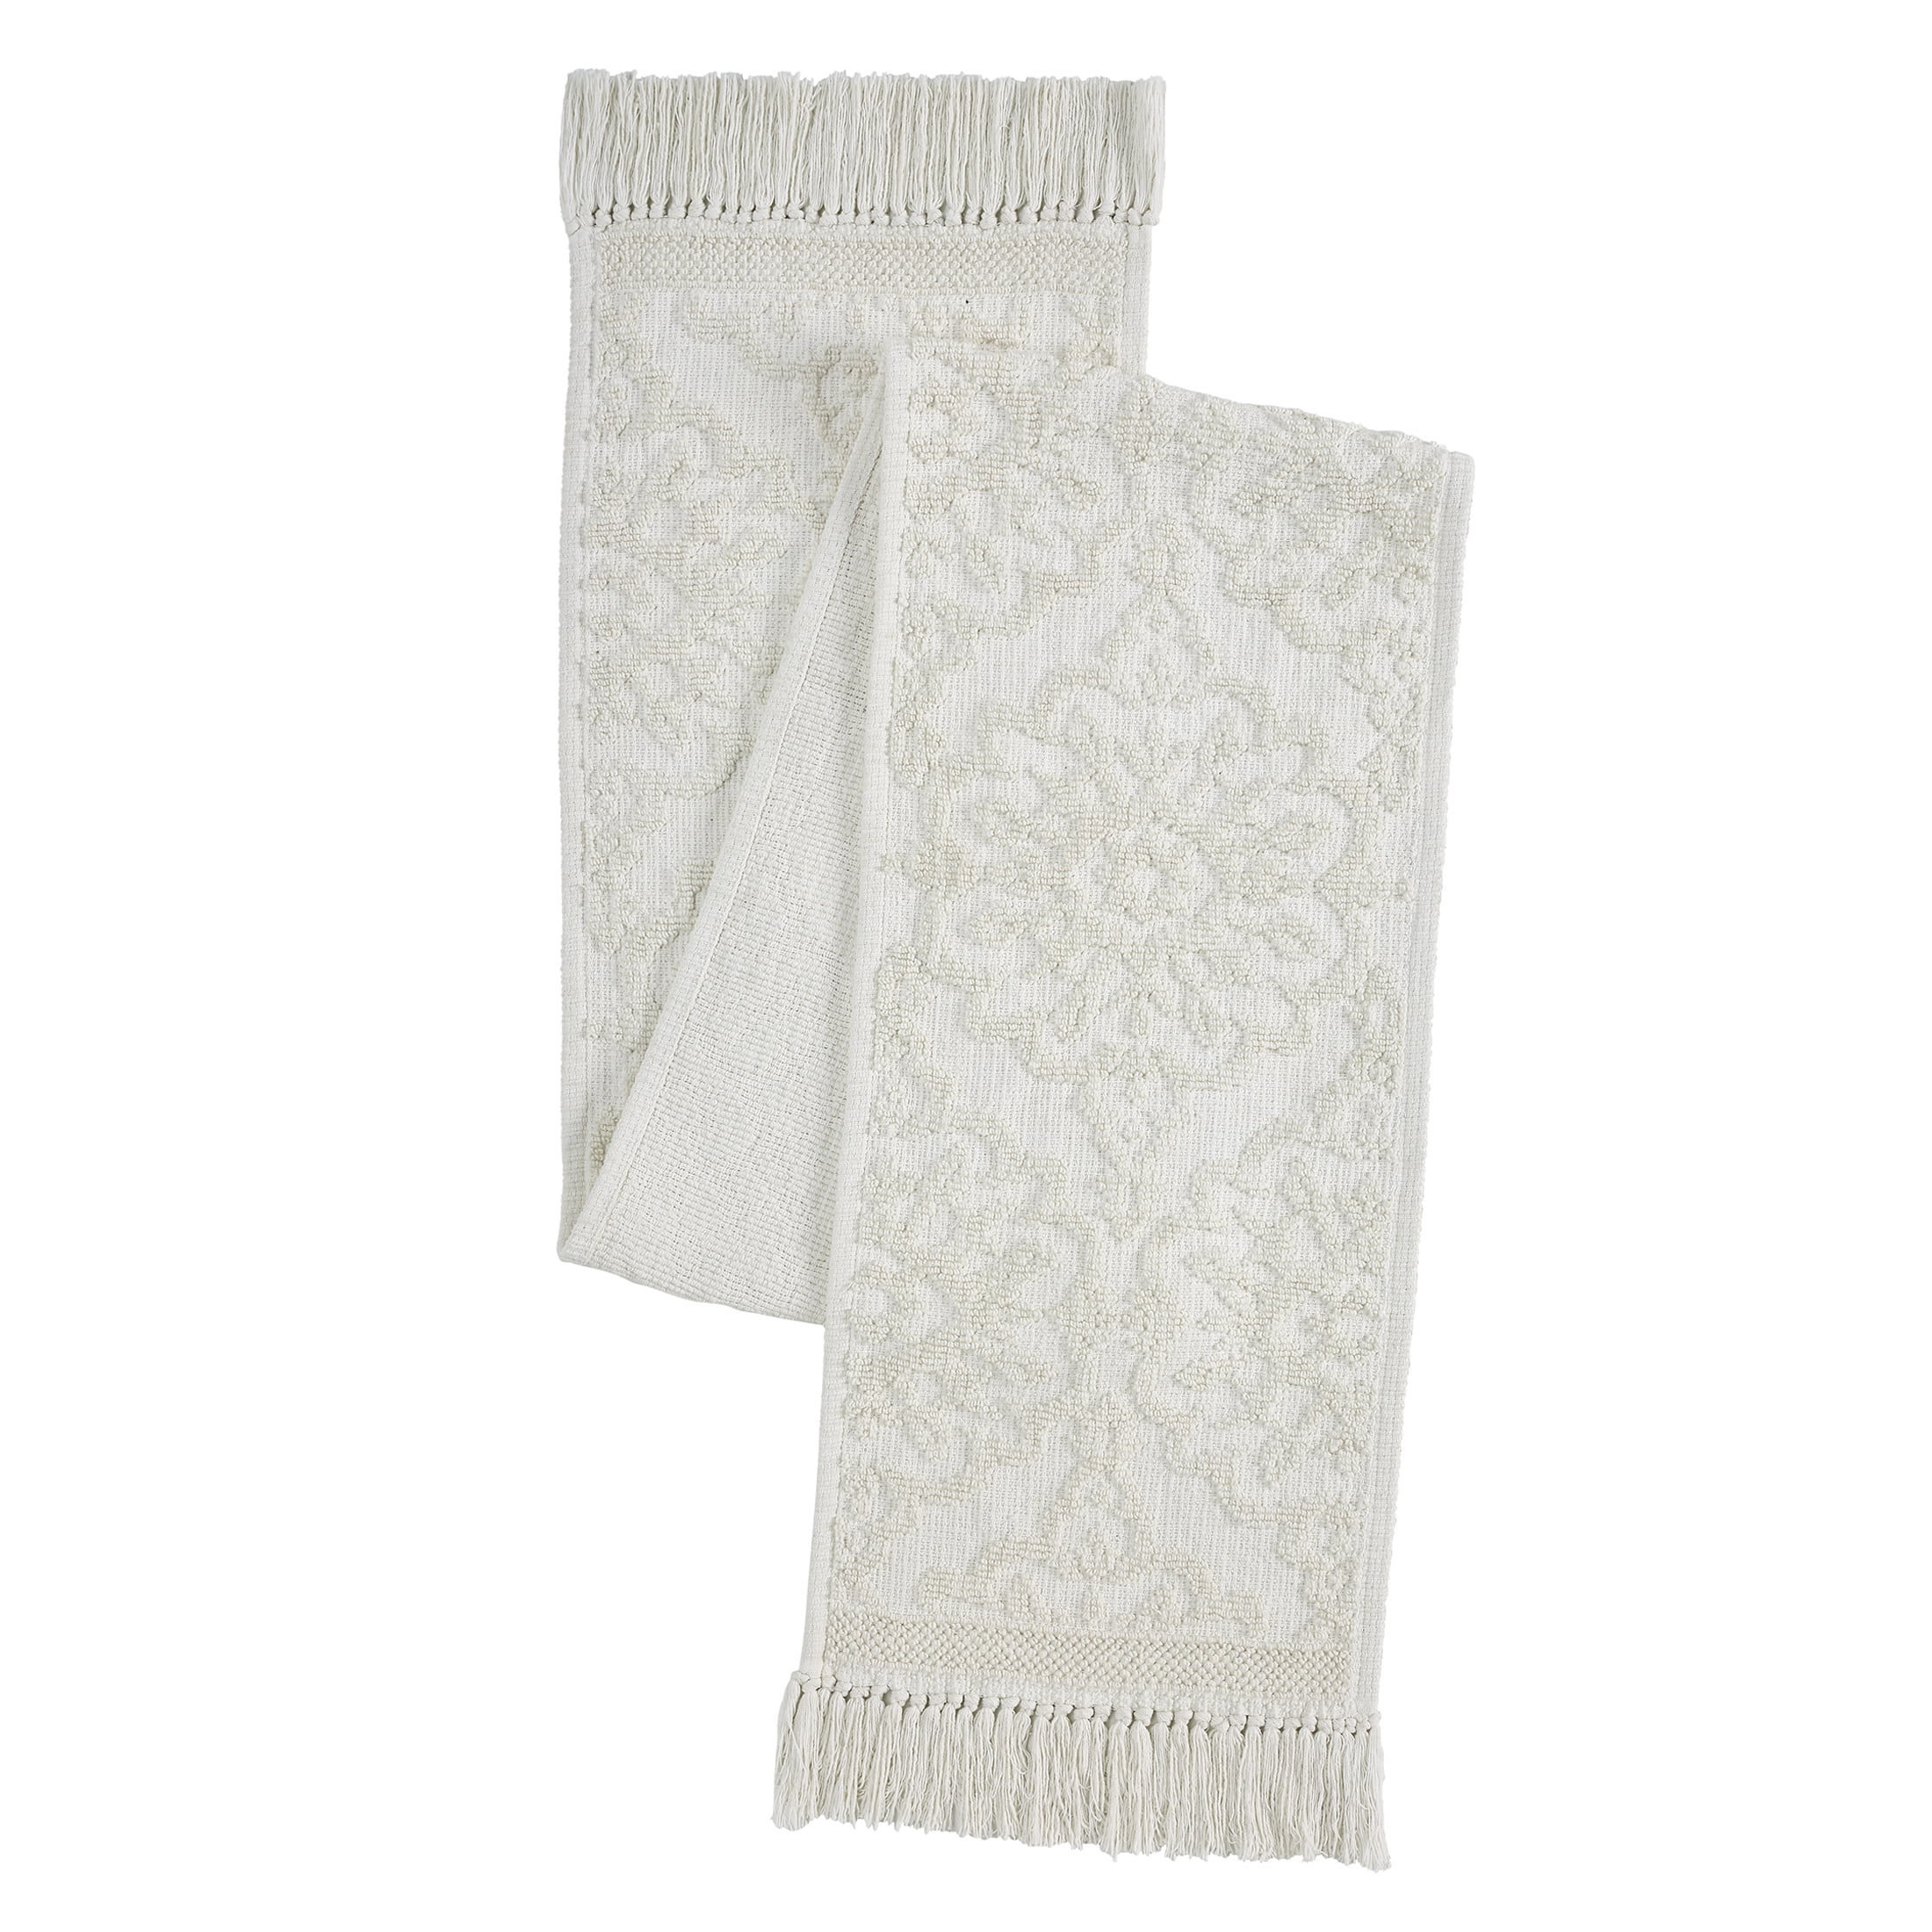 My Texas House Emma Woven Cotton Rich 14" x 90" Table Runner, White, 1 Piece